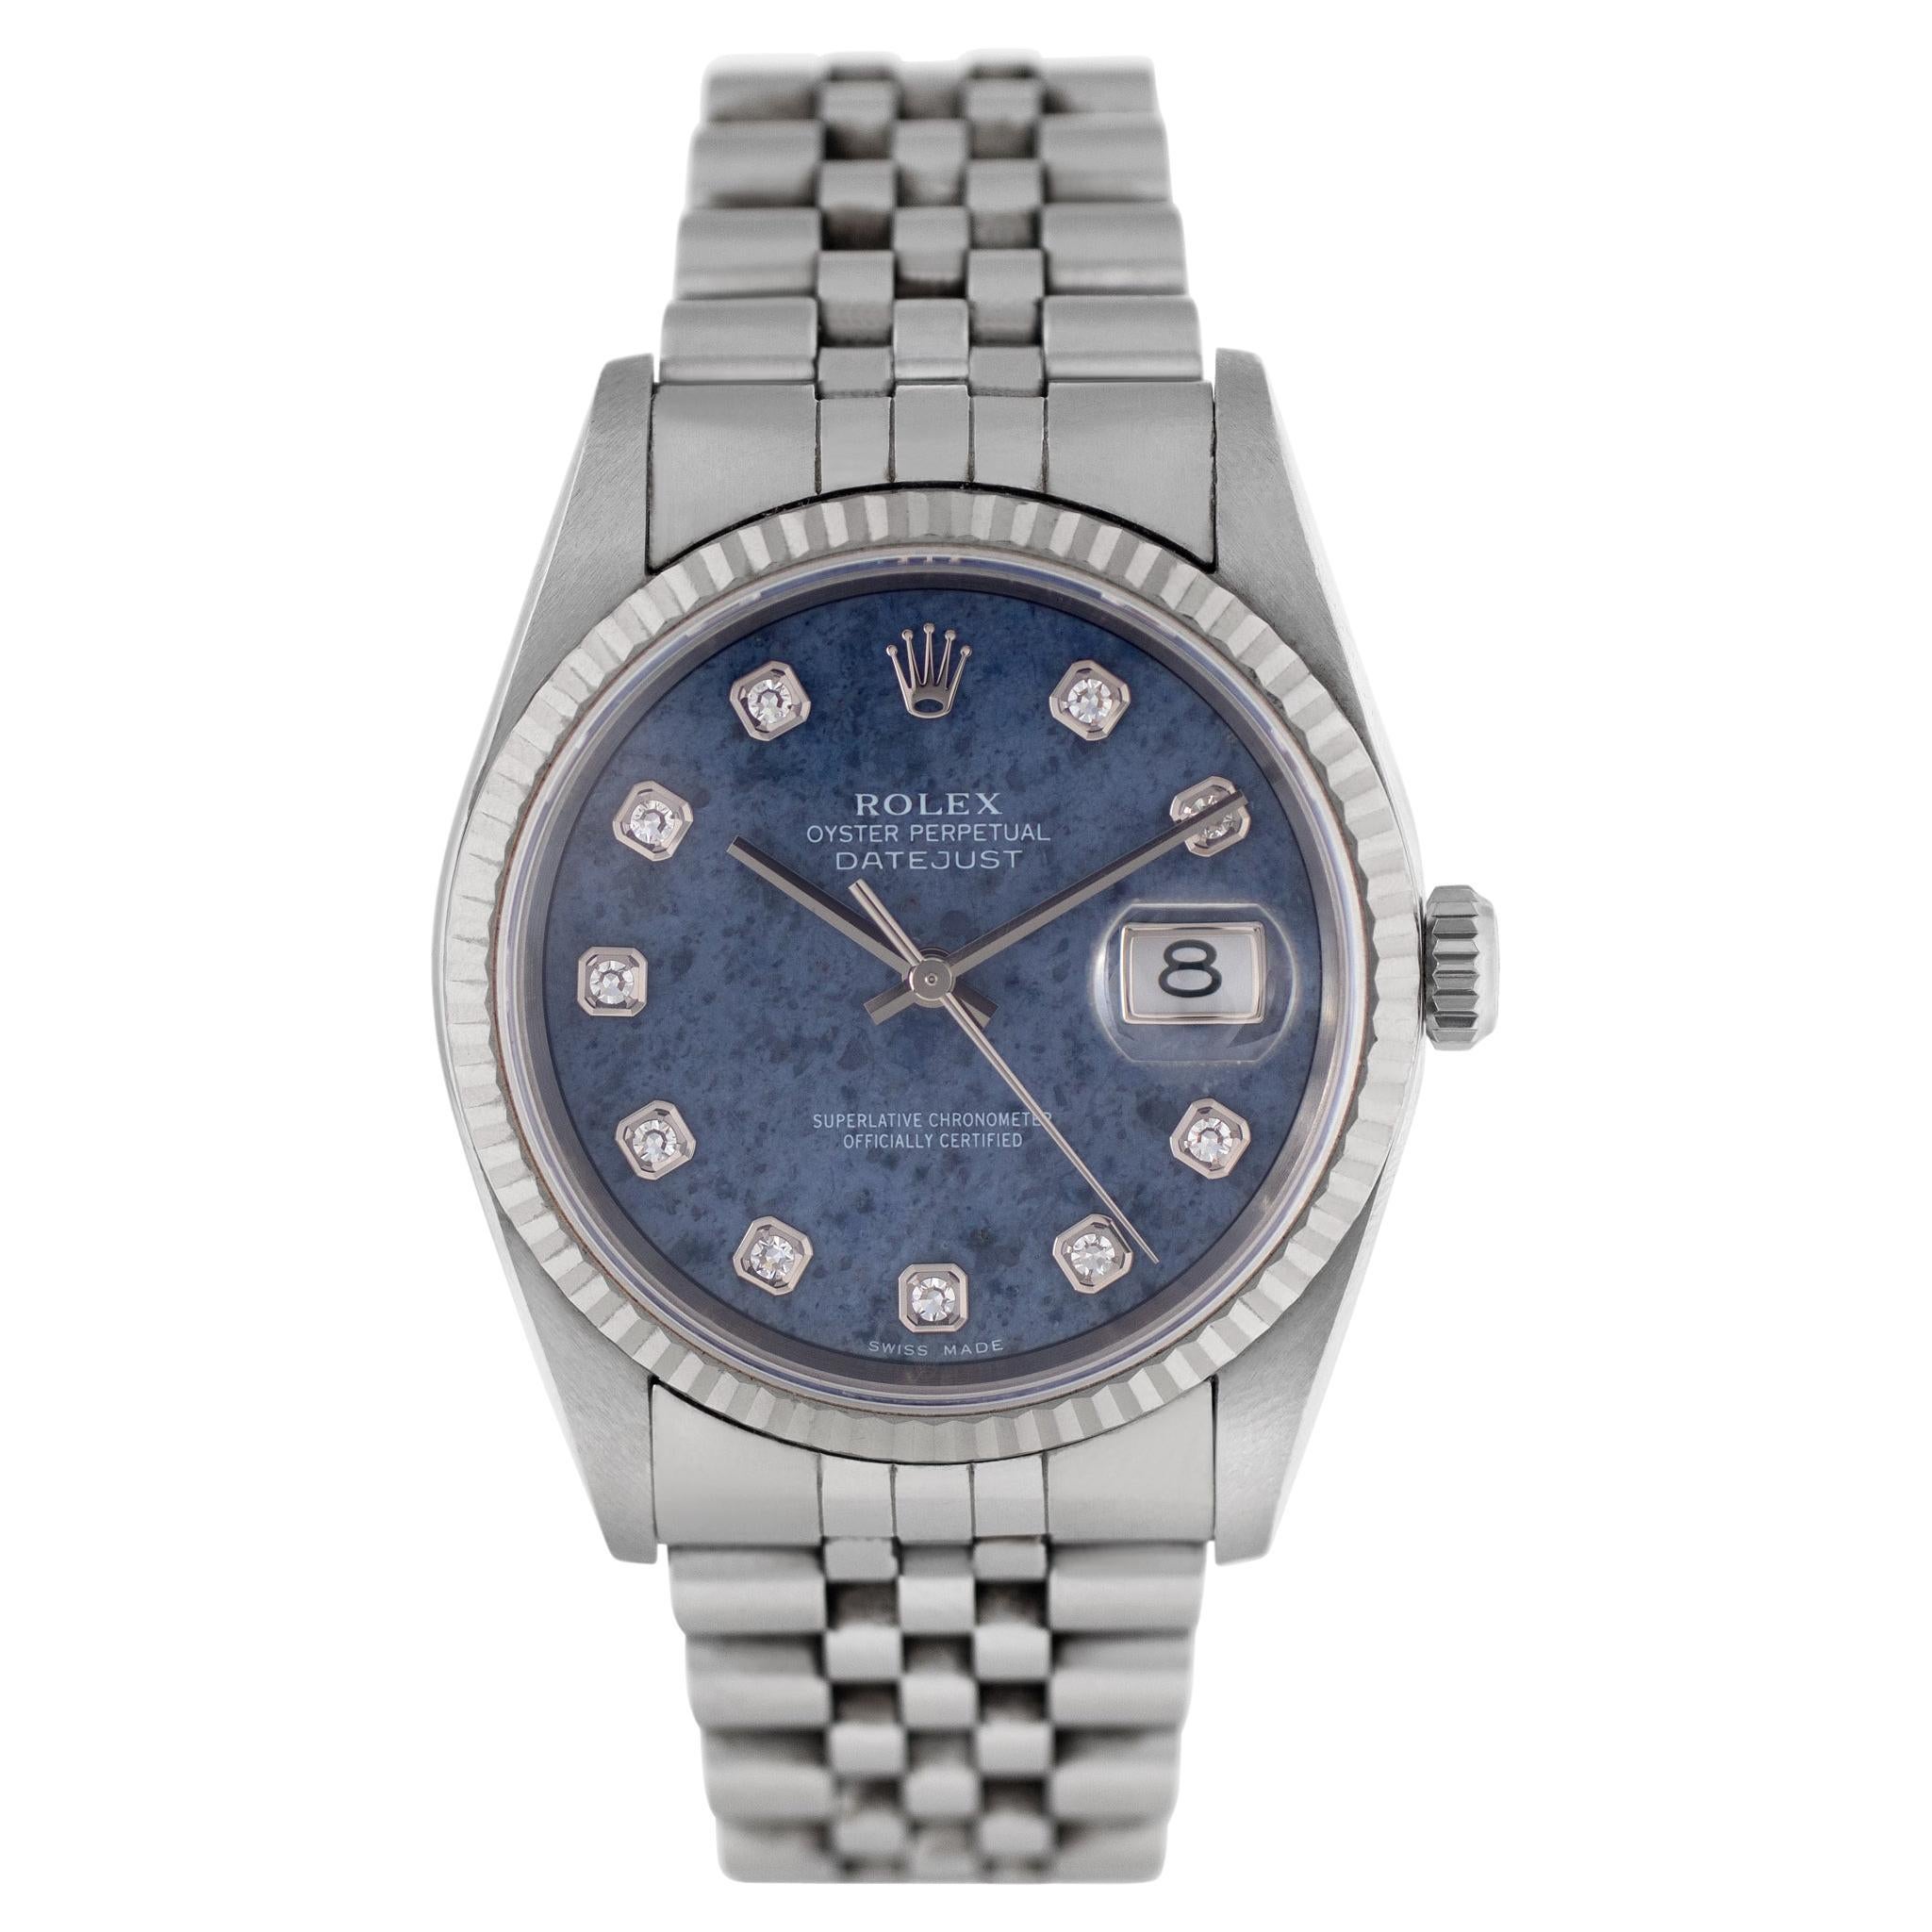 Rolex Datejust with factory sodalite diamond dial in stainless steel with 18k wh